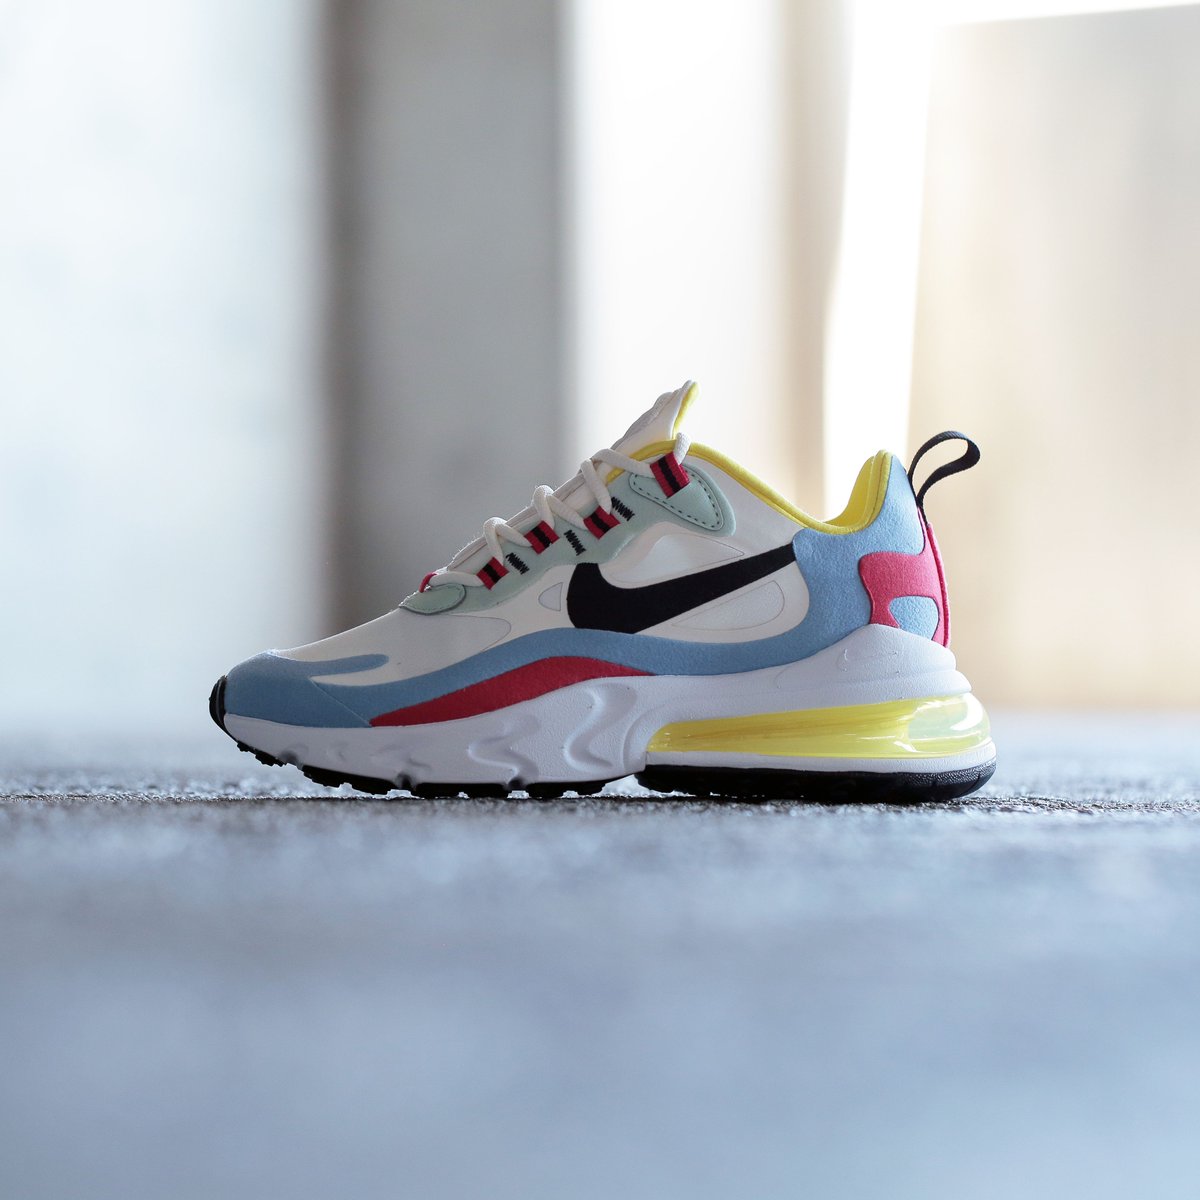 Bait The Nike Air Max 270 React Bauhaus Women S Color Way Are Available Now Visit Us At T Co 5tur2hwo8s To Shop T Co Z6cwob6vda